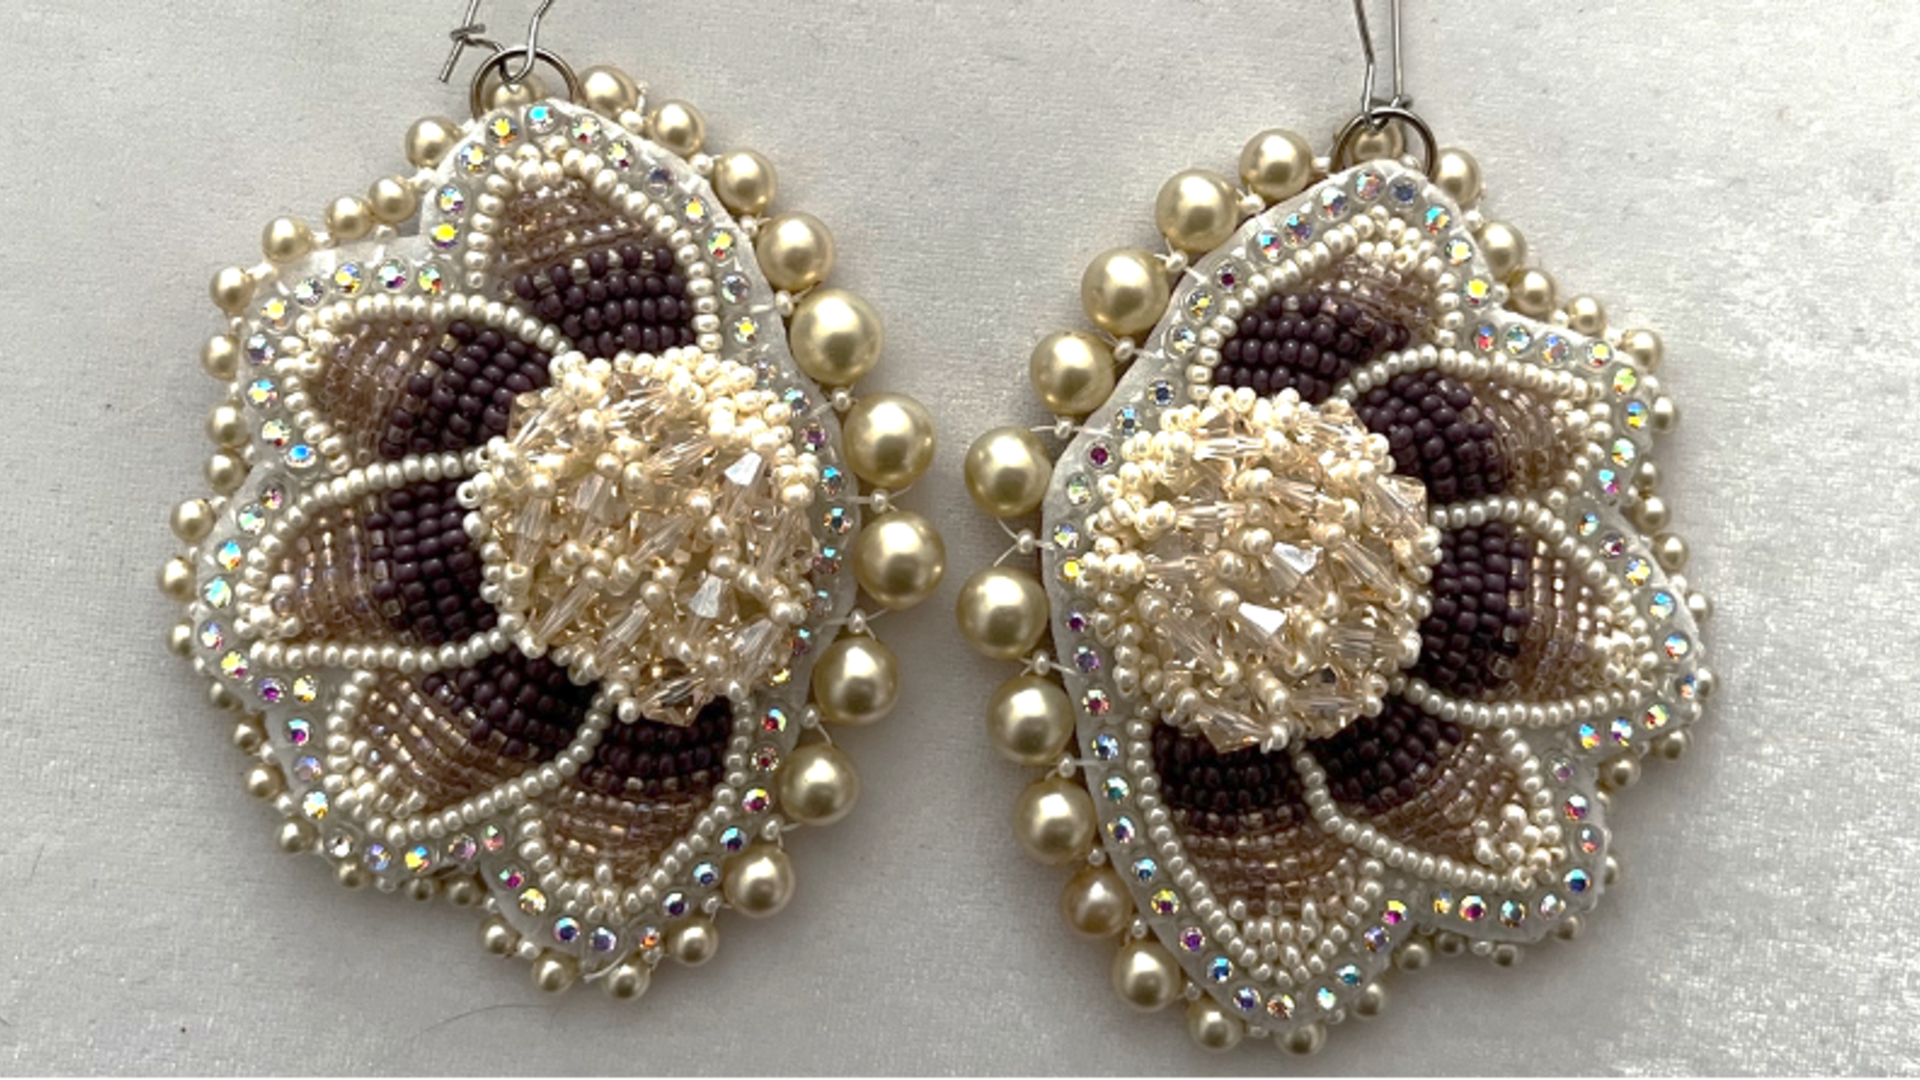 A pair of earrings made of ivory pearls and light brown and dark brown beads made by University of Waterloo historian and anthropologist Talena Atfield who is a member of the Kanien’kehá:ka Nation of the Six Nations of the Grand River.